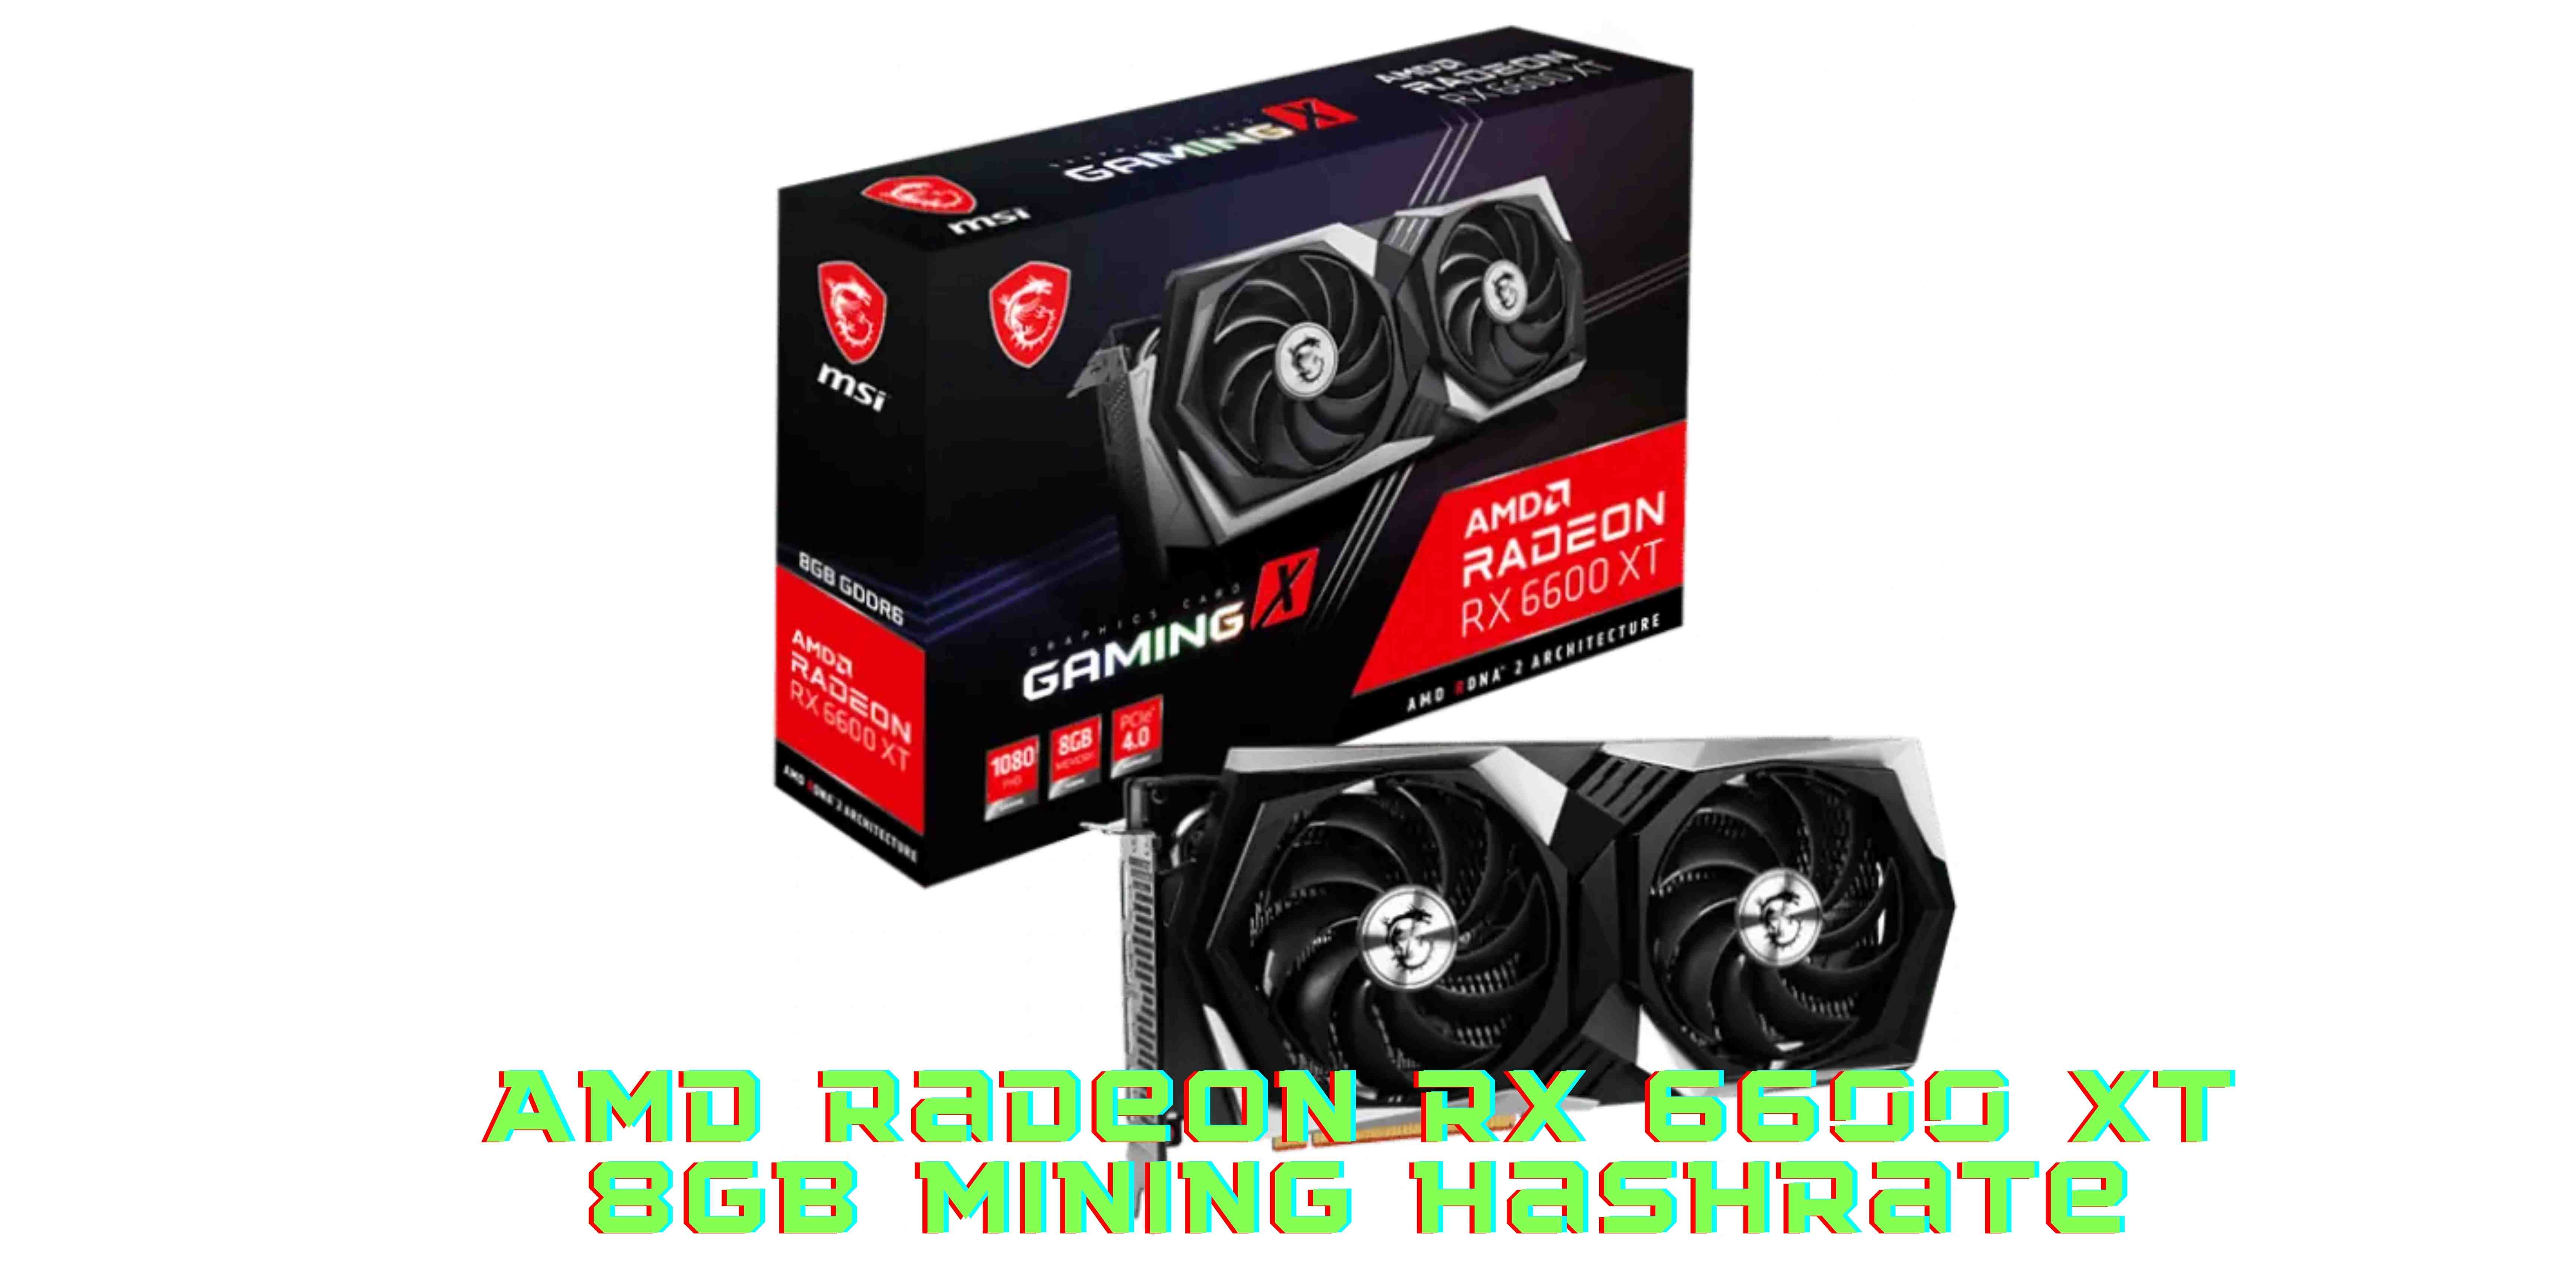 Mining GPU With Low Power Consumption And Low Operating Temperature- AMD Radeon RX 6600 XT 8GB Mining Hashrate